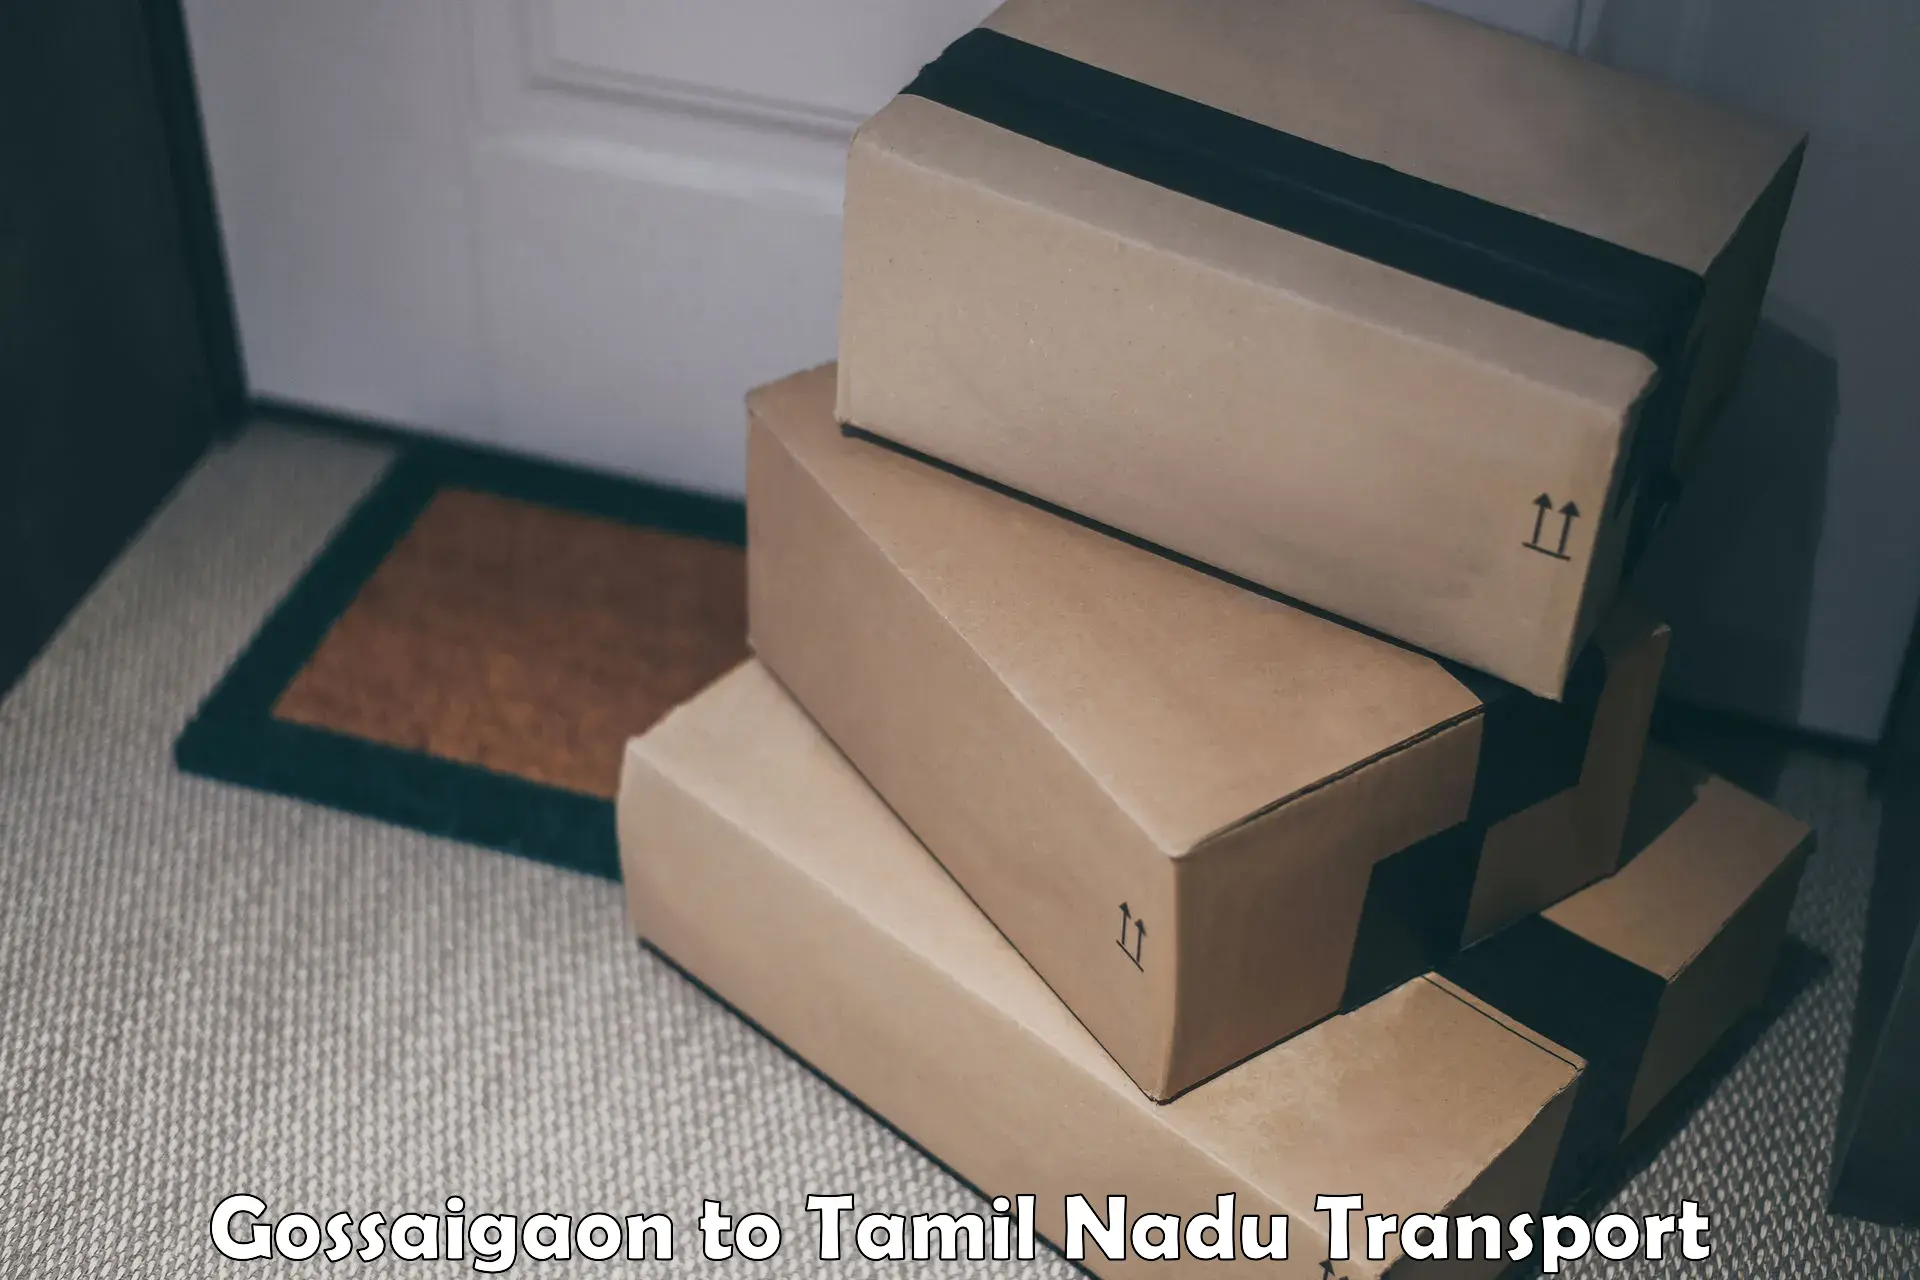 Domestic goods transportation services Gossaigaon to Omalur